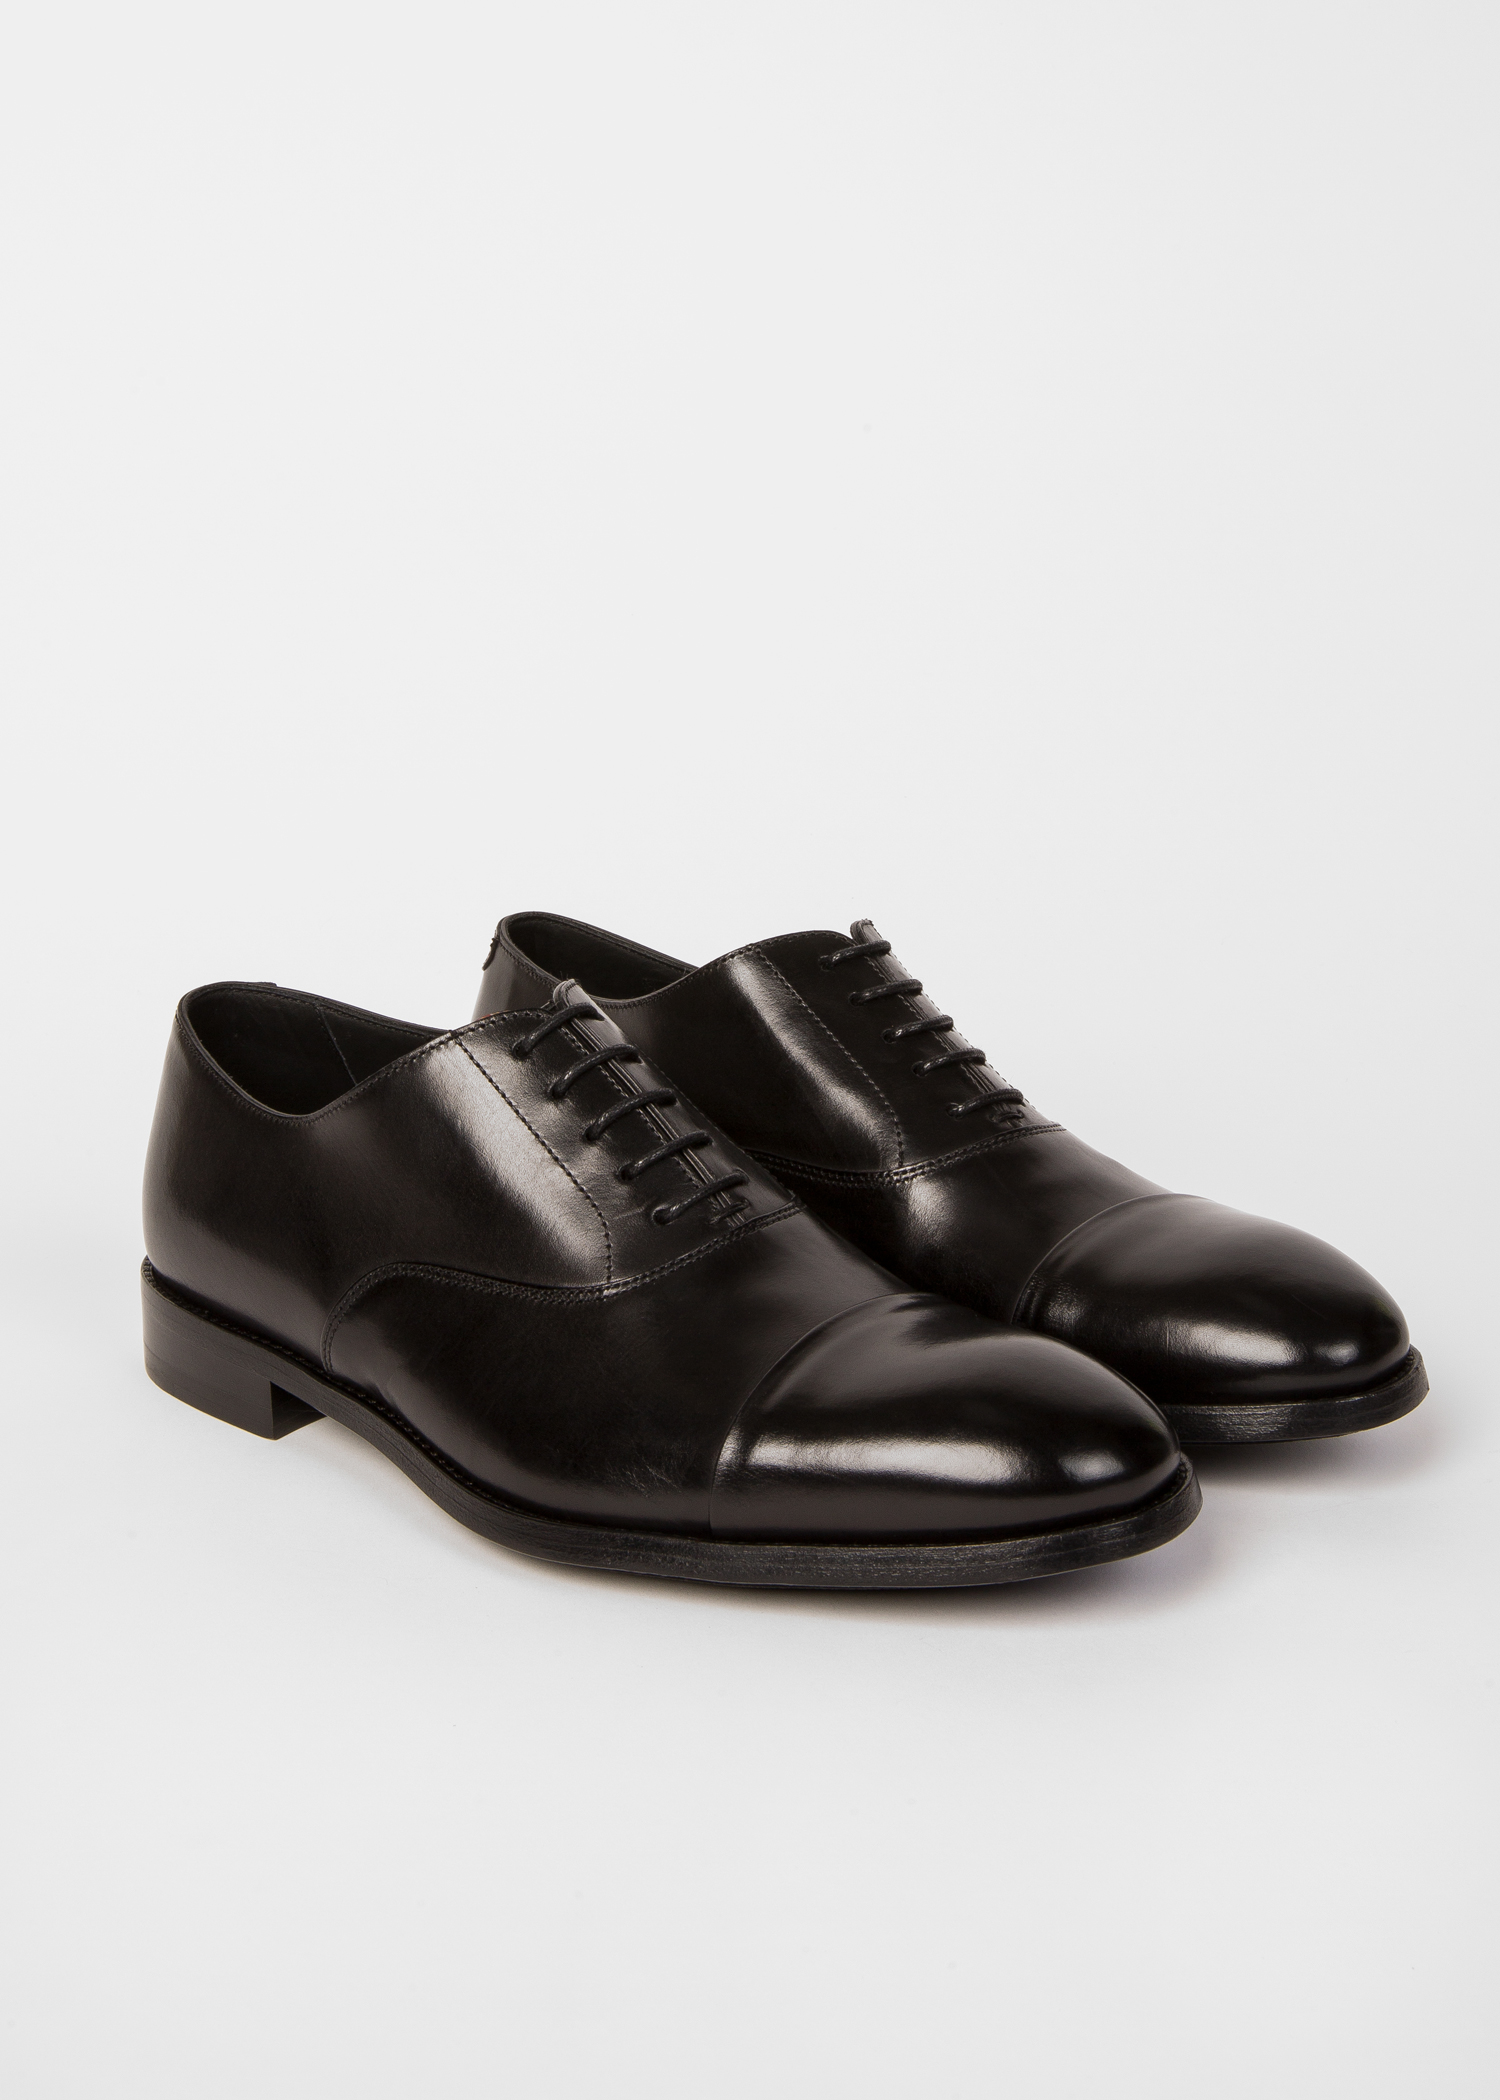 Angled View - Men's Black Leather 'Brent' Oxford Shoes With 'Signature Stripe' Details Paul Smith